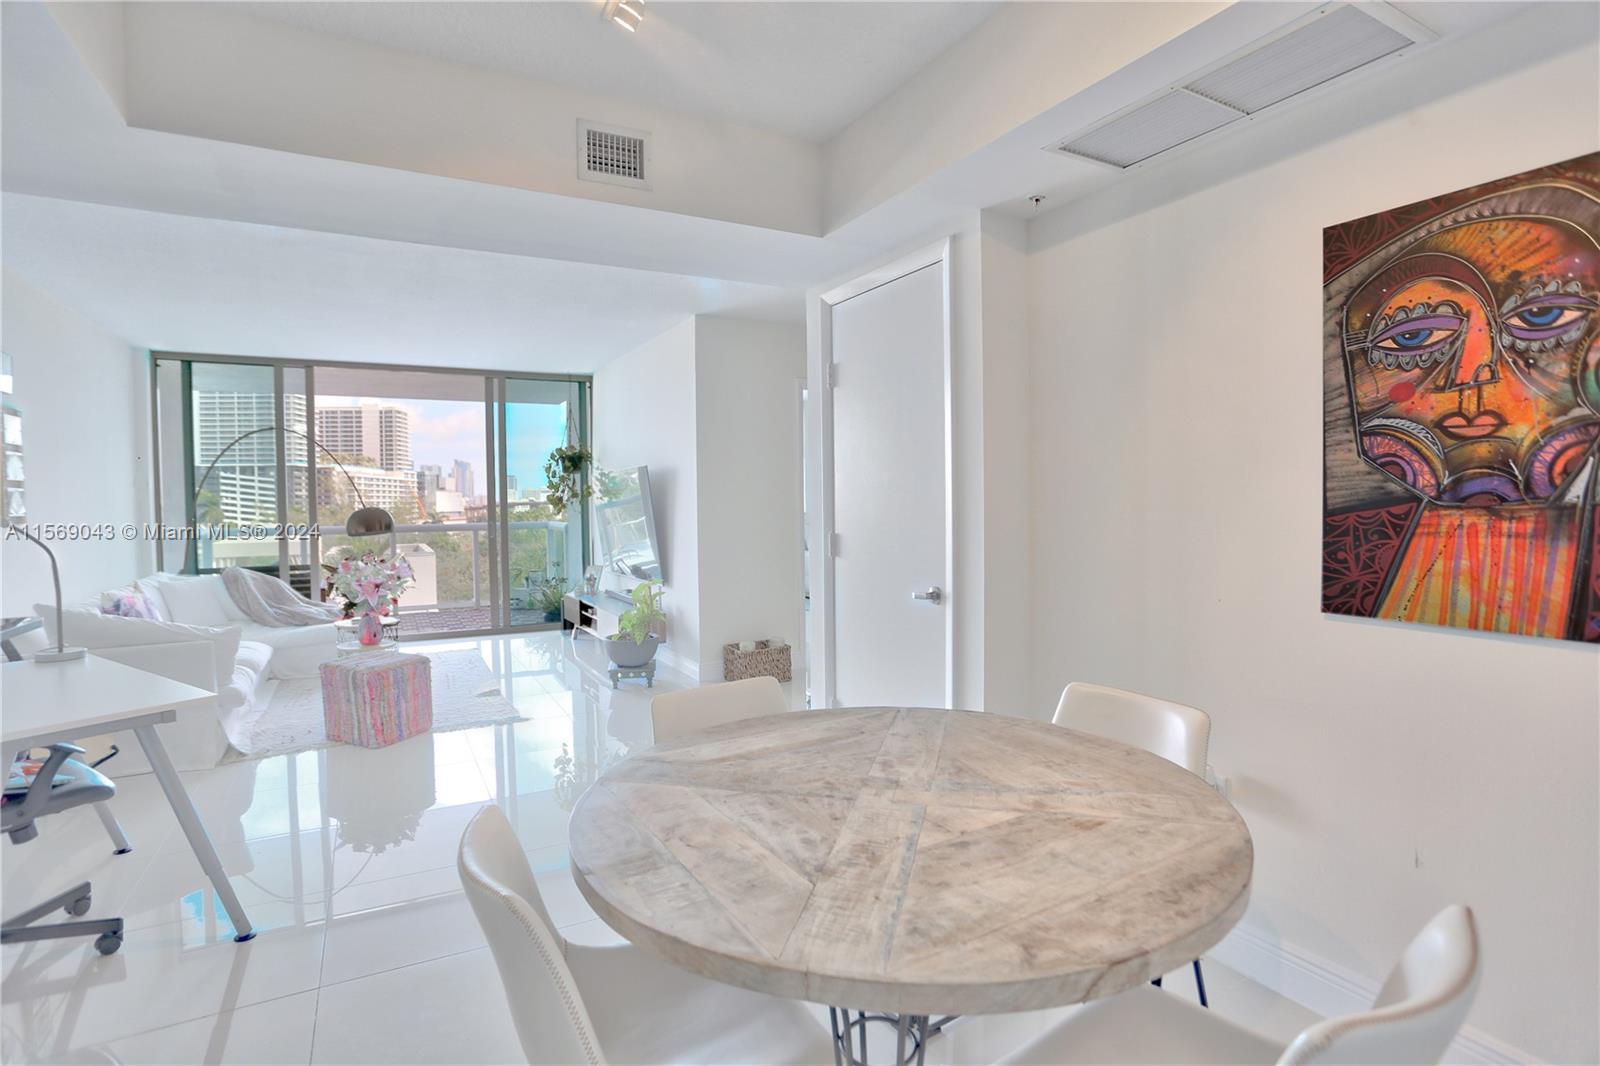 Photo of 1861 NW S River Dr #809 in Miami, FL